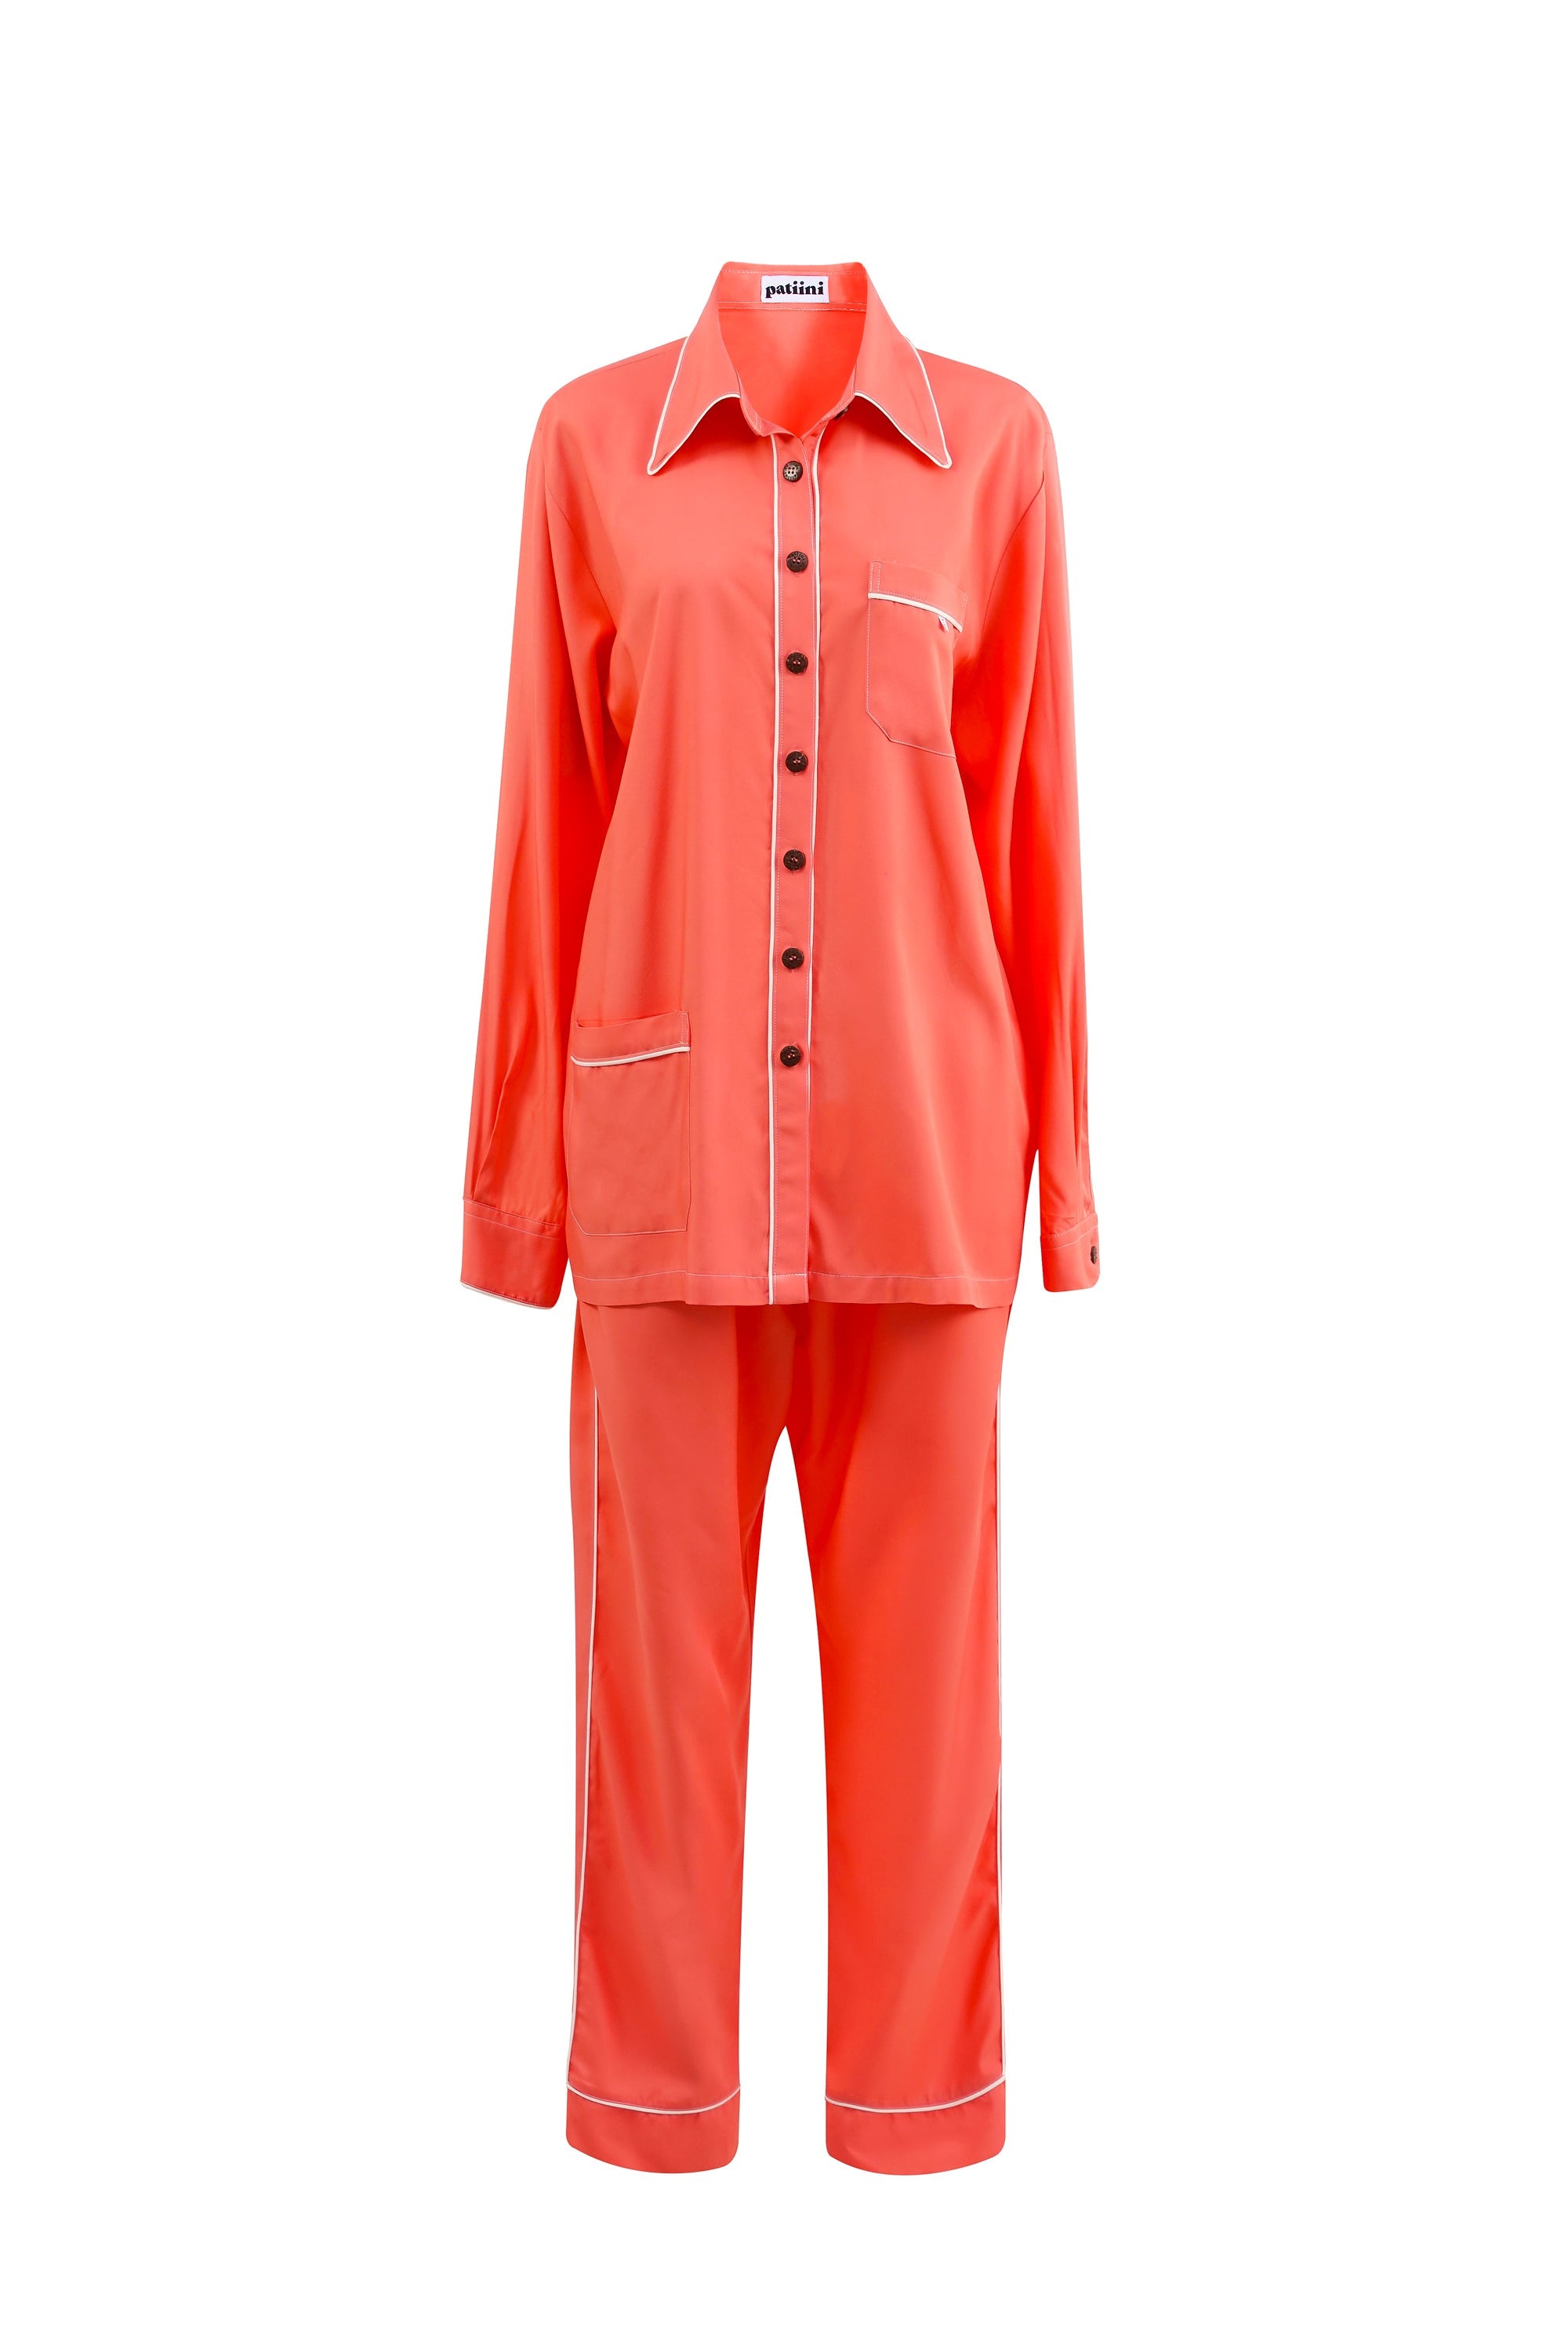 Coral long-sleeve pajama set with contrasting white piping.